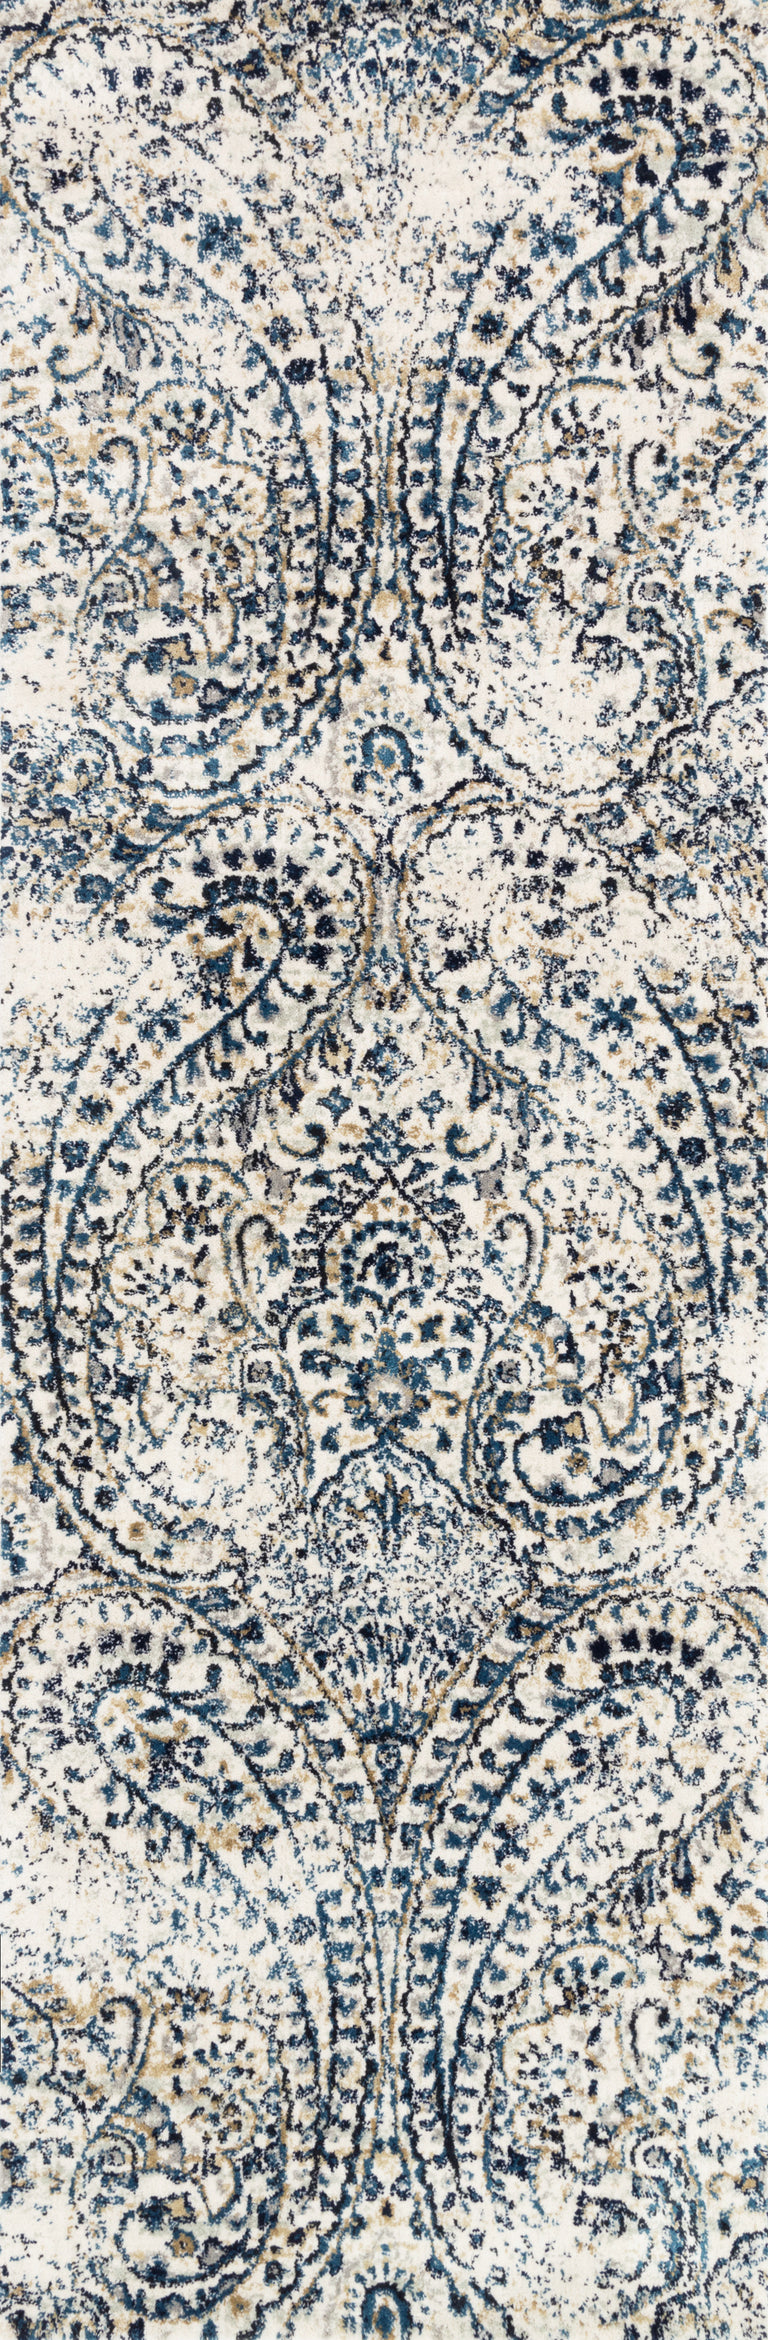 Loloi Rugs Torrance Collection Rug in Ivory, Indigo - 7'10" x 10'10"